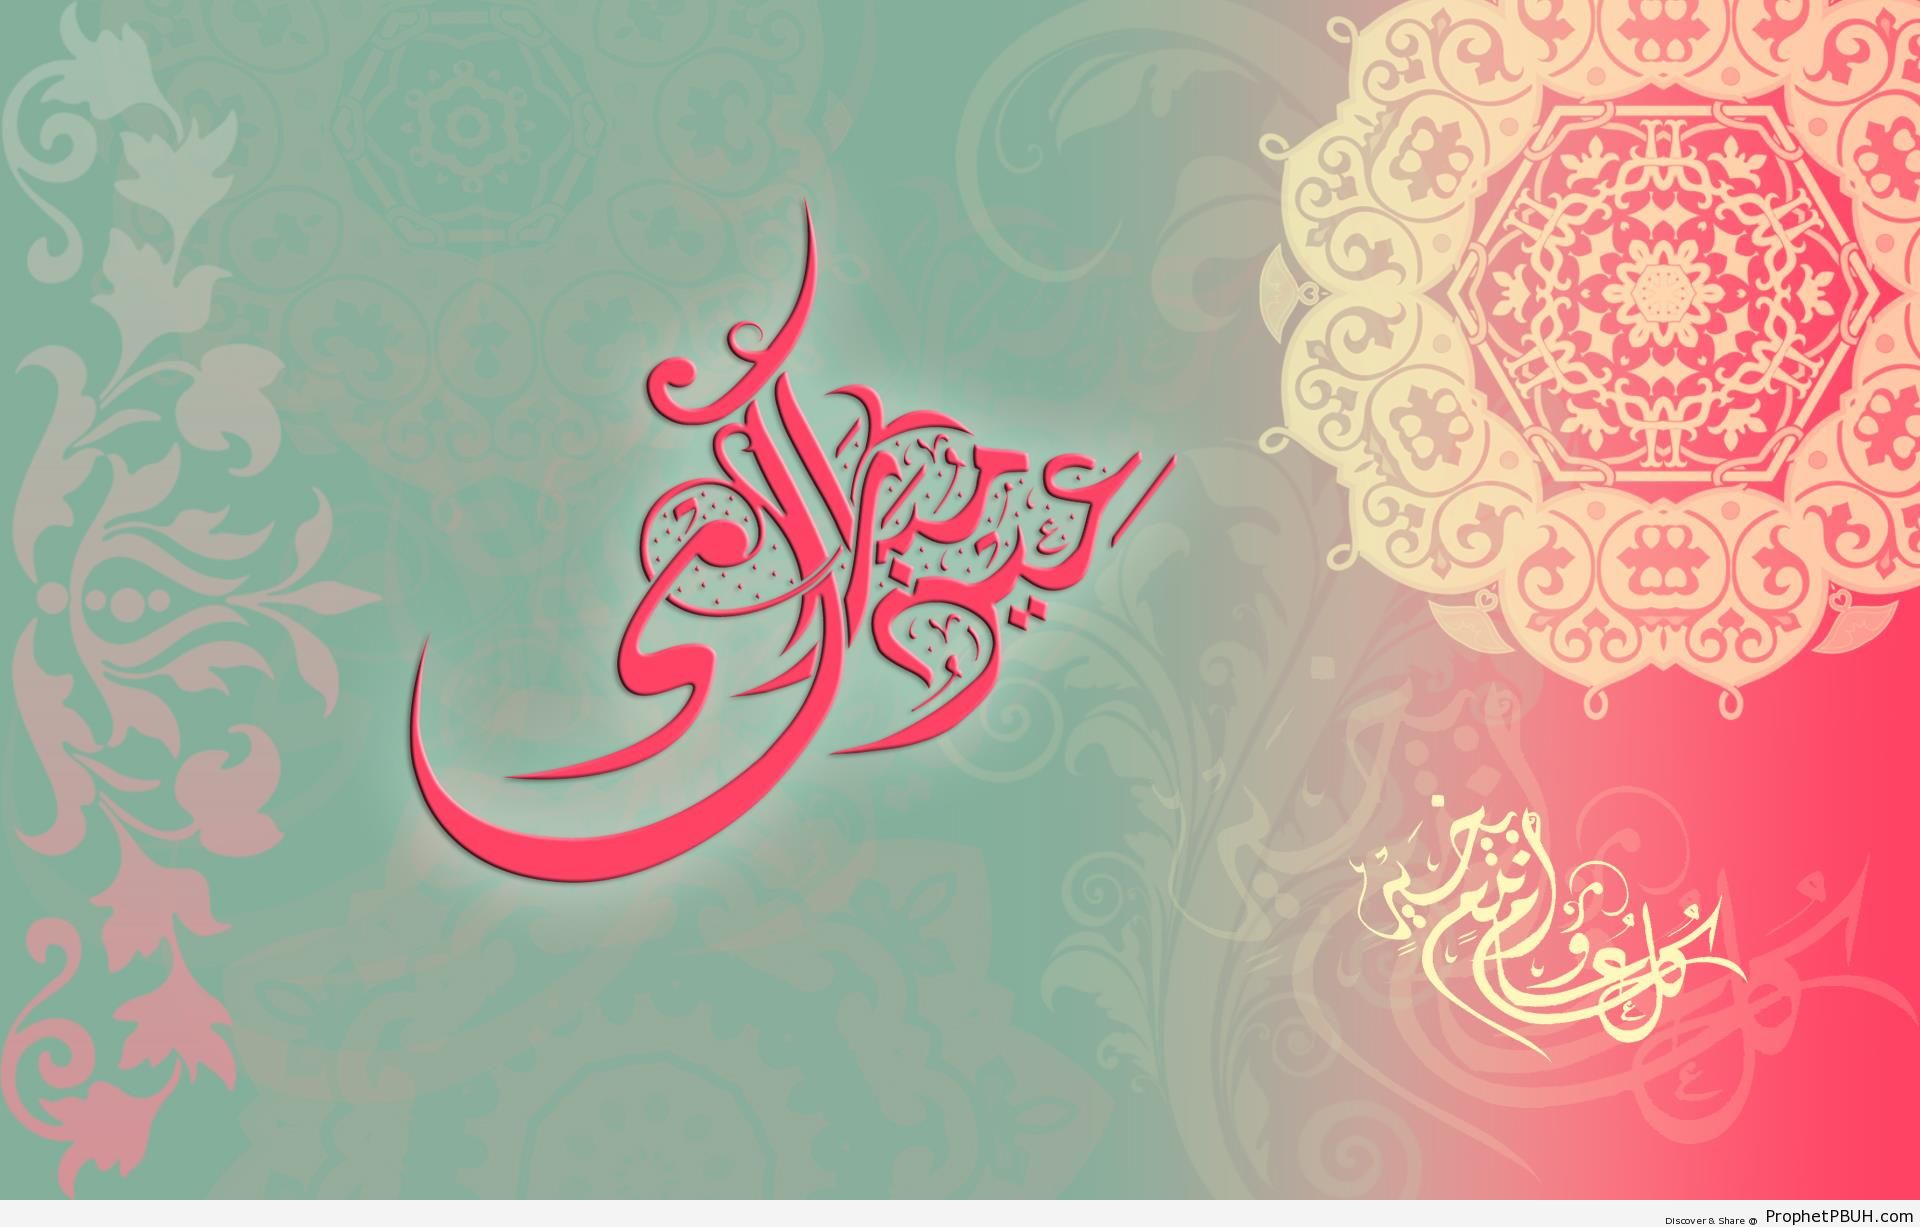 Eid Greeting Card with Calligraphy and Zakhrafah (Arabesque) - Eid Mubarak Greeting Cards, Graphics, and Wallpapers 